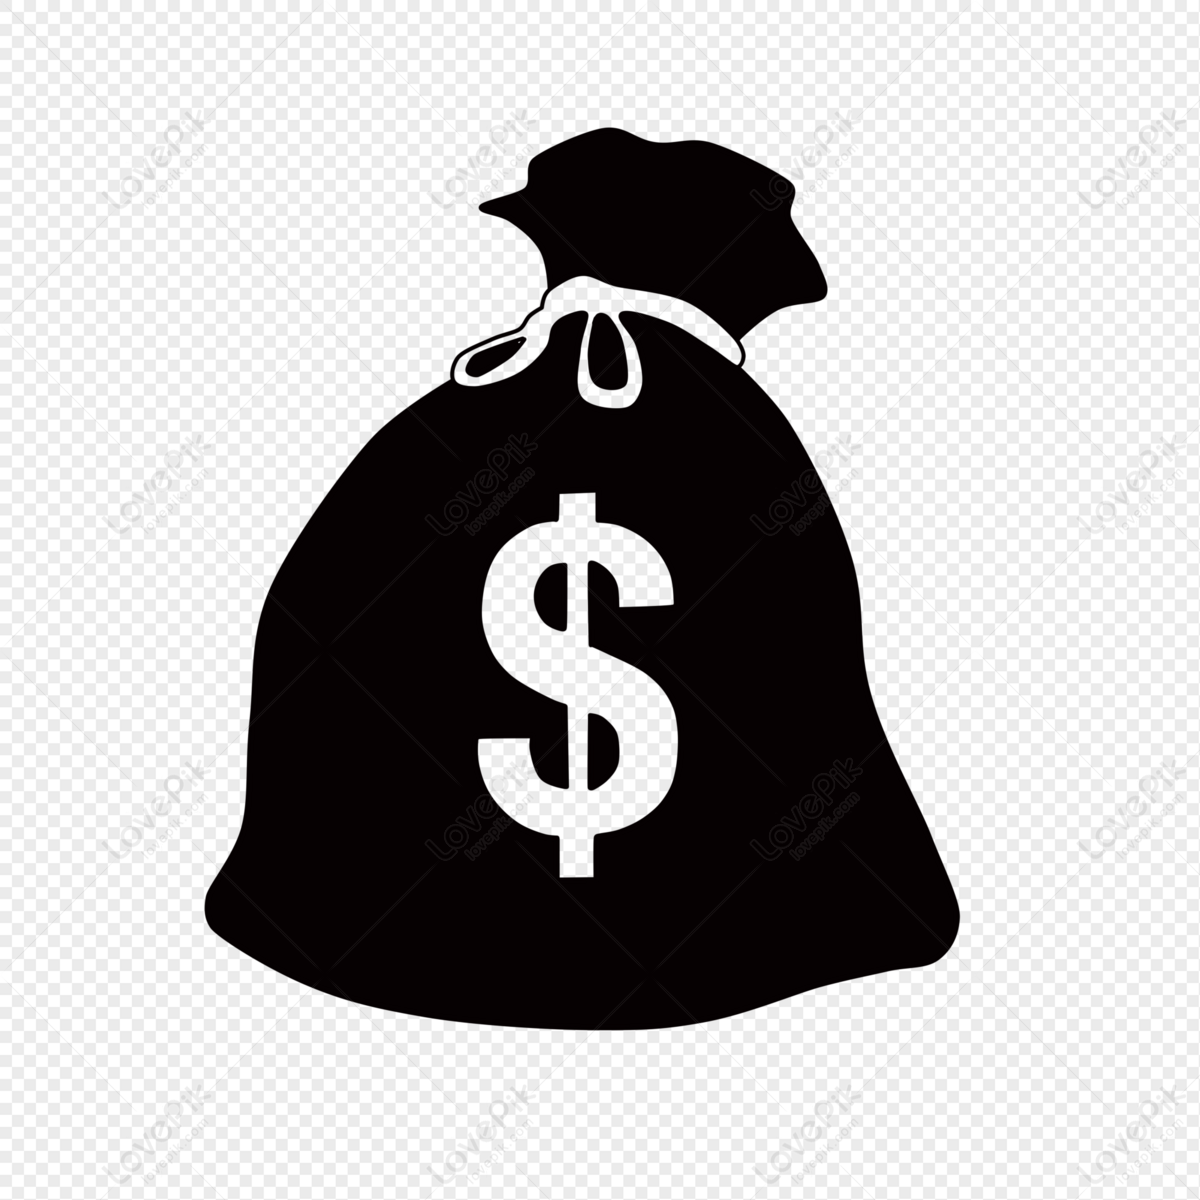 Money Bag, Material, Purse, Illustration PNG Transparent Image And Clipart  Image For Free Download - Lovepik | 400200457